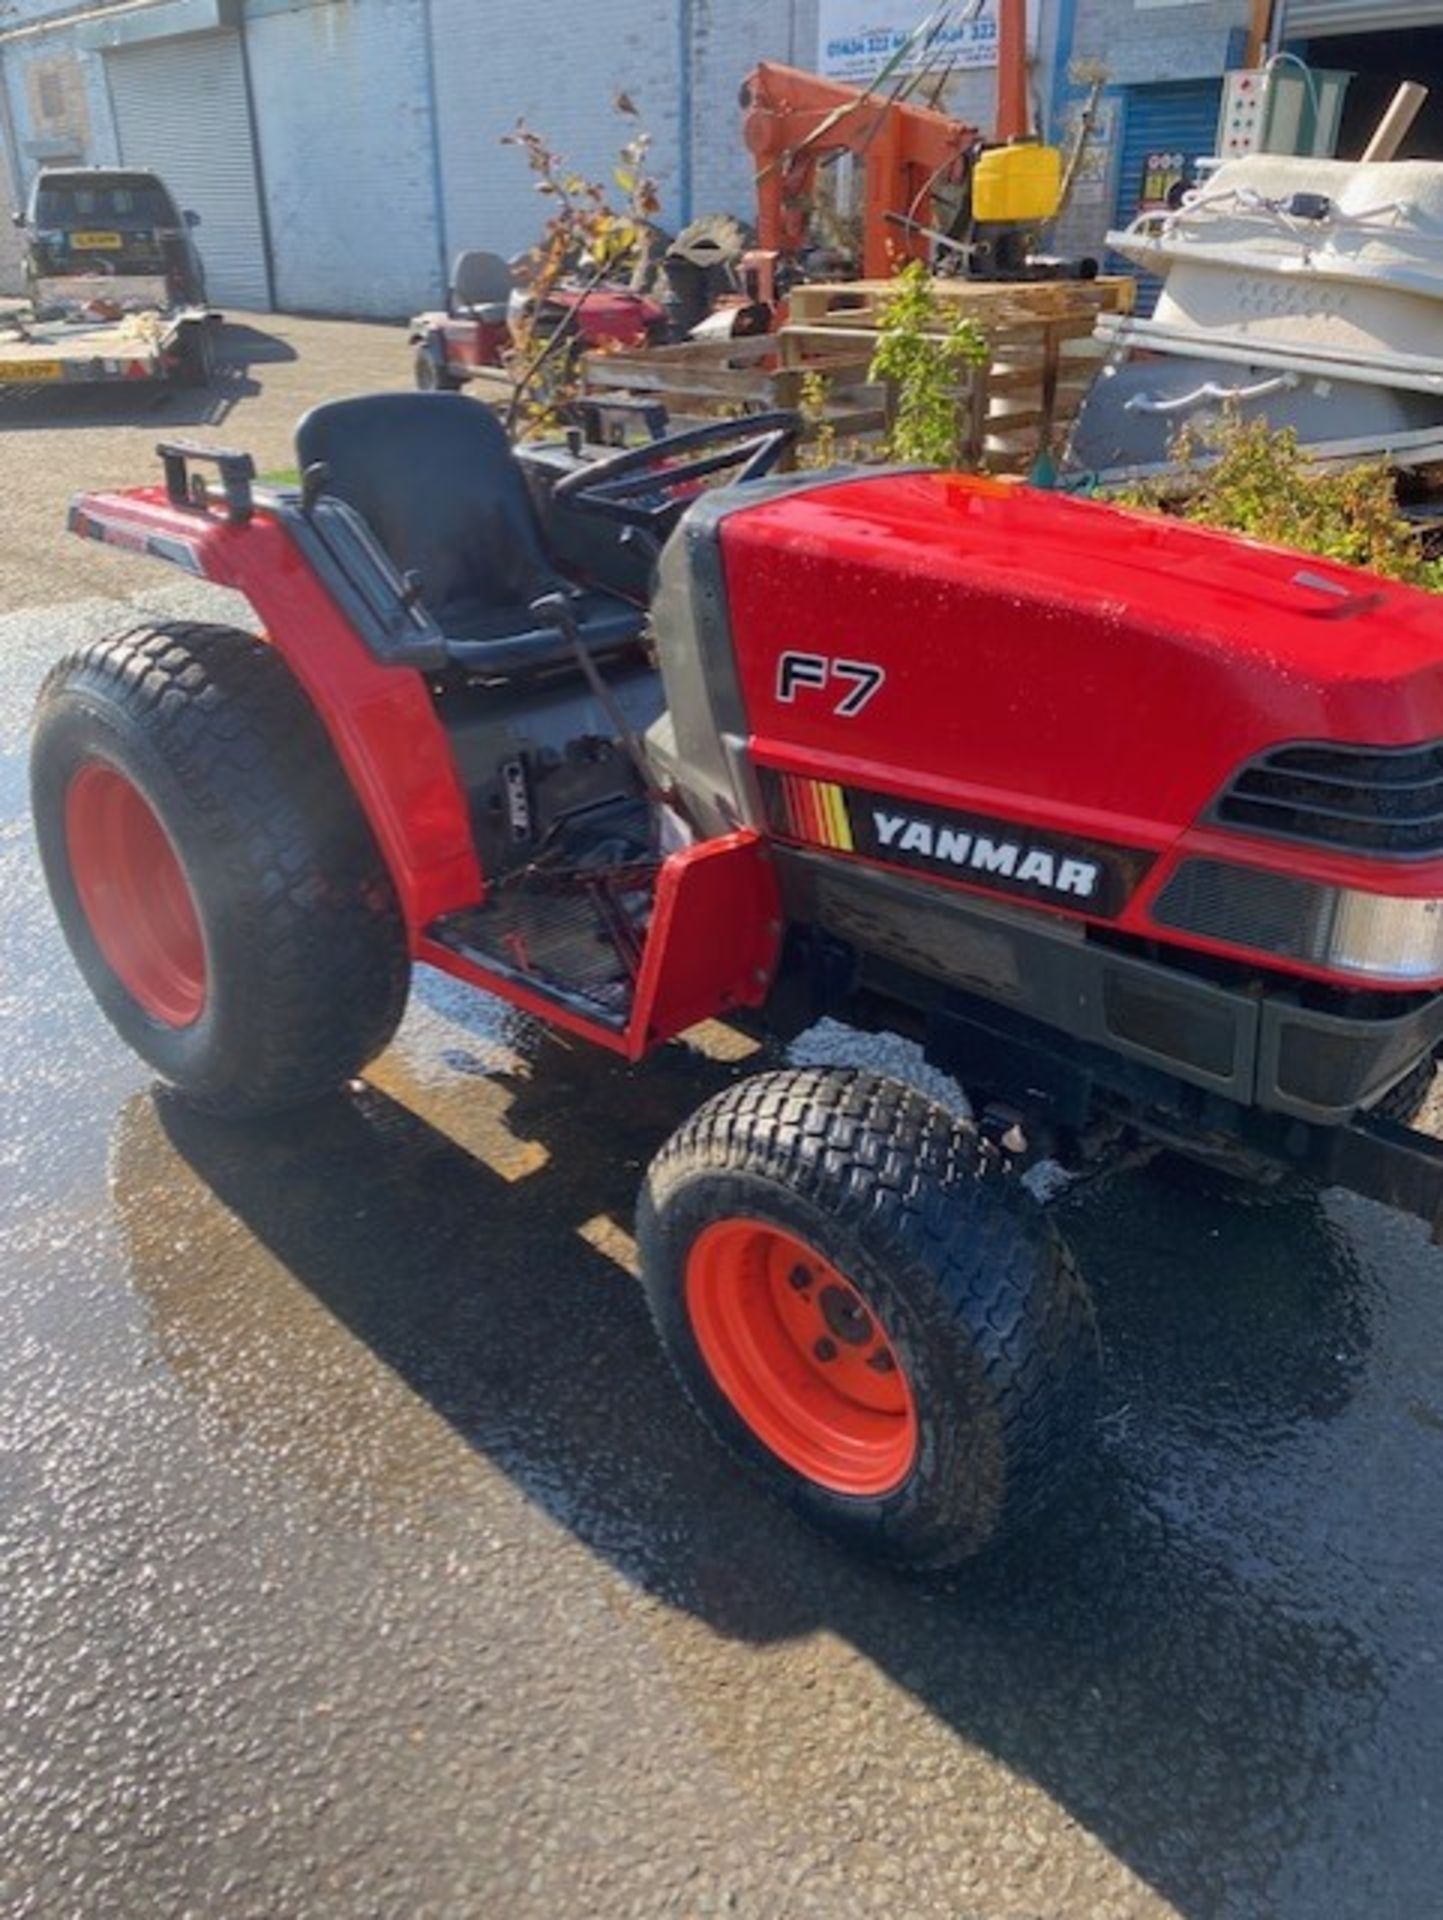 Yanmar compact tractor ready to put to work it is the F7 model 16.5 hp 4wd with differential lock in - Image 6 of 7